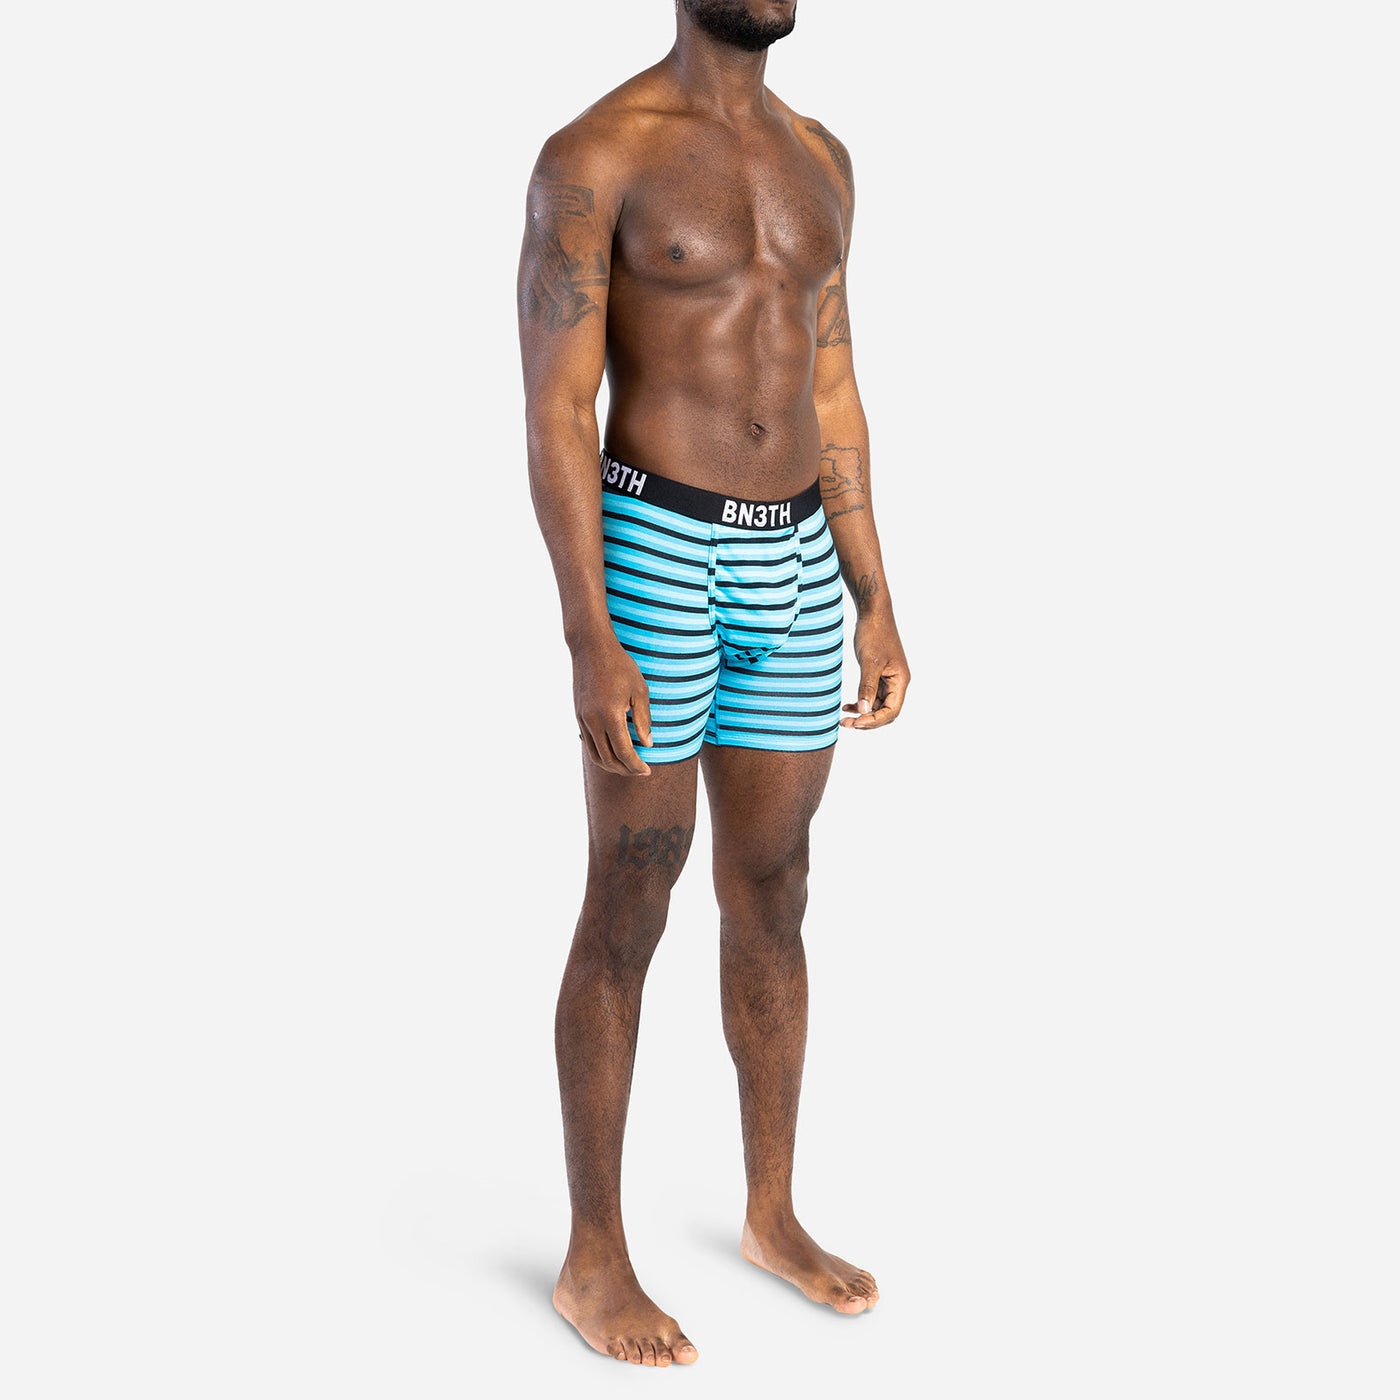 BN3TH Outset Boxer Brief